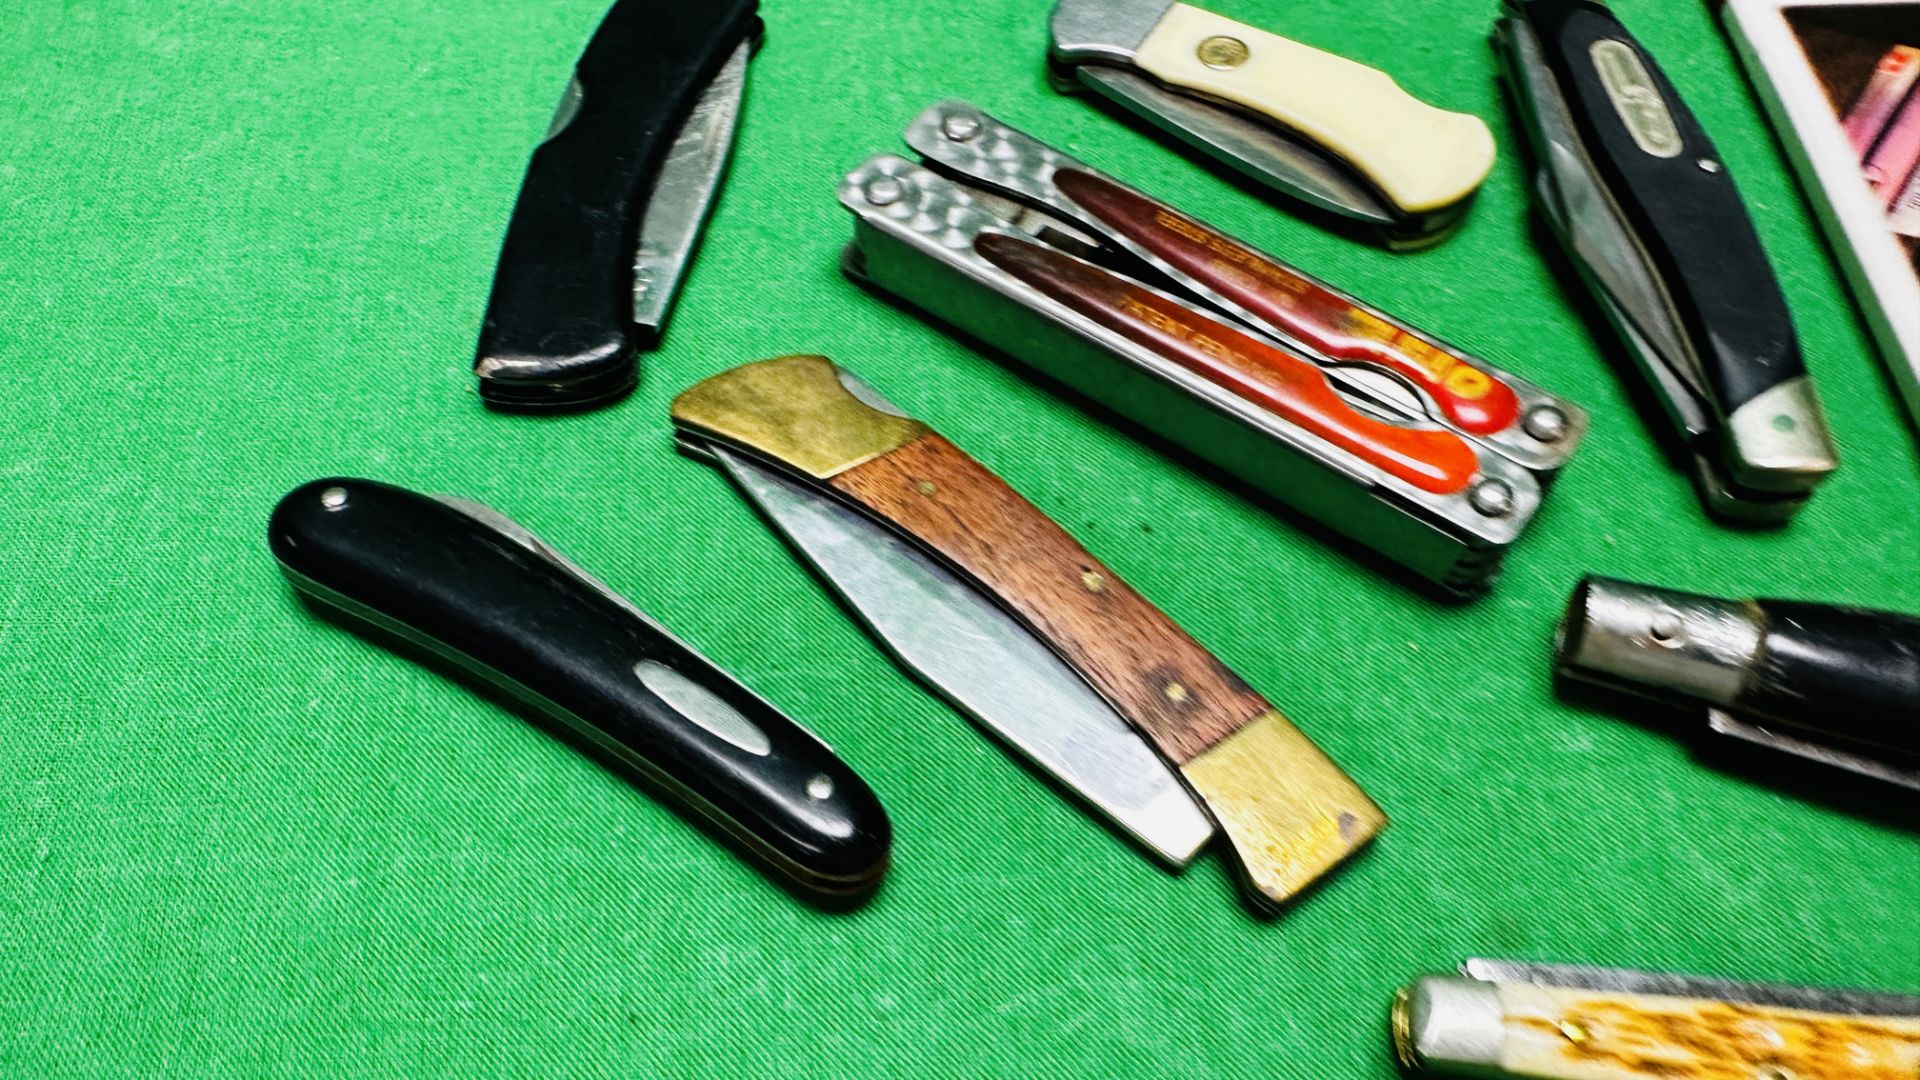 GROUP OF 11 VARIOUS POCKET KNIVES AND MULTI TOOLS TO INCLUDE PUMA 4 STAR MINI, BUCK, WILDCAT, - Image 5 of 8